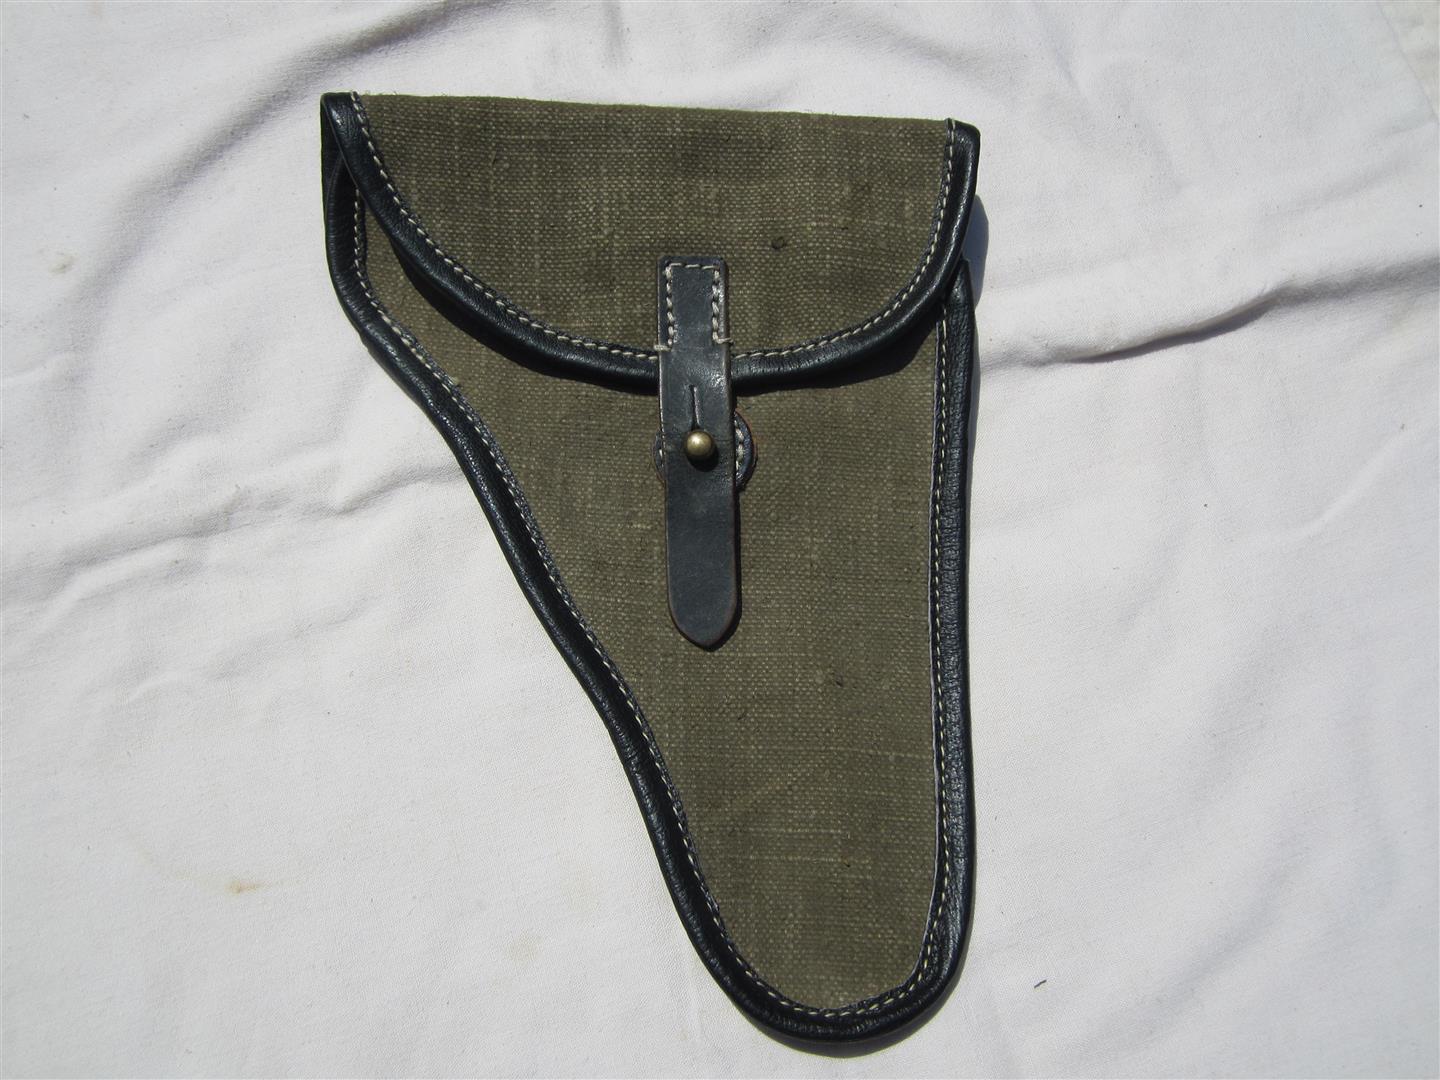 WW2 WH Flare Gun Holster - Reproduction